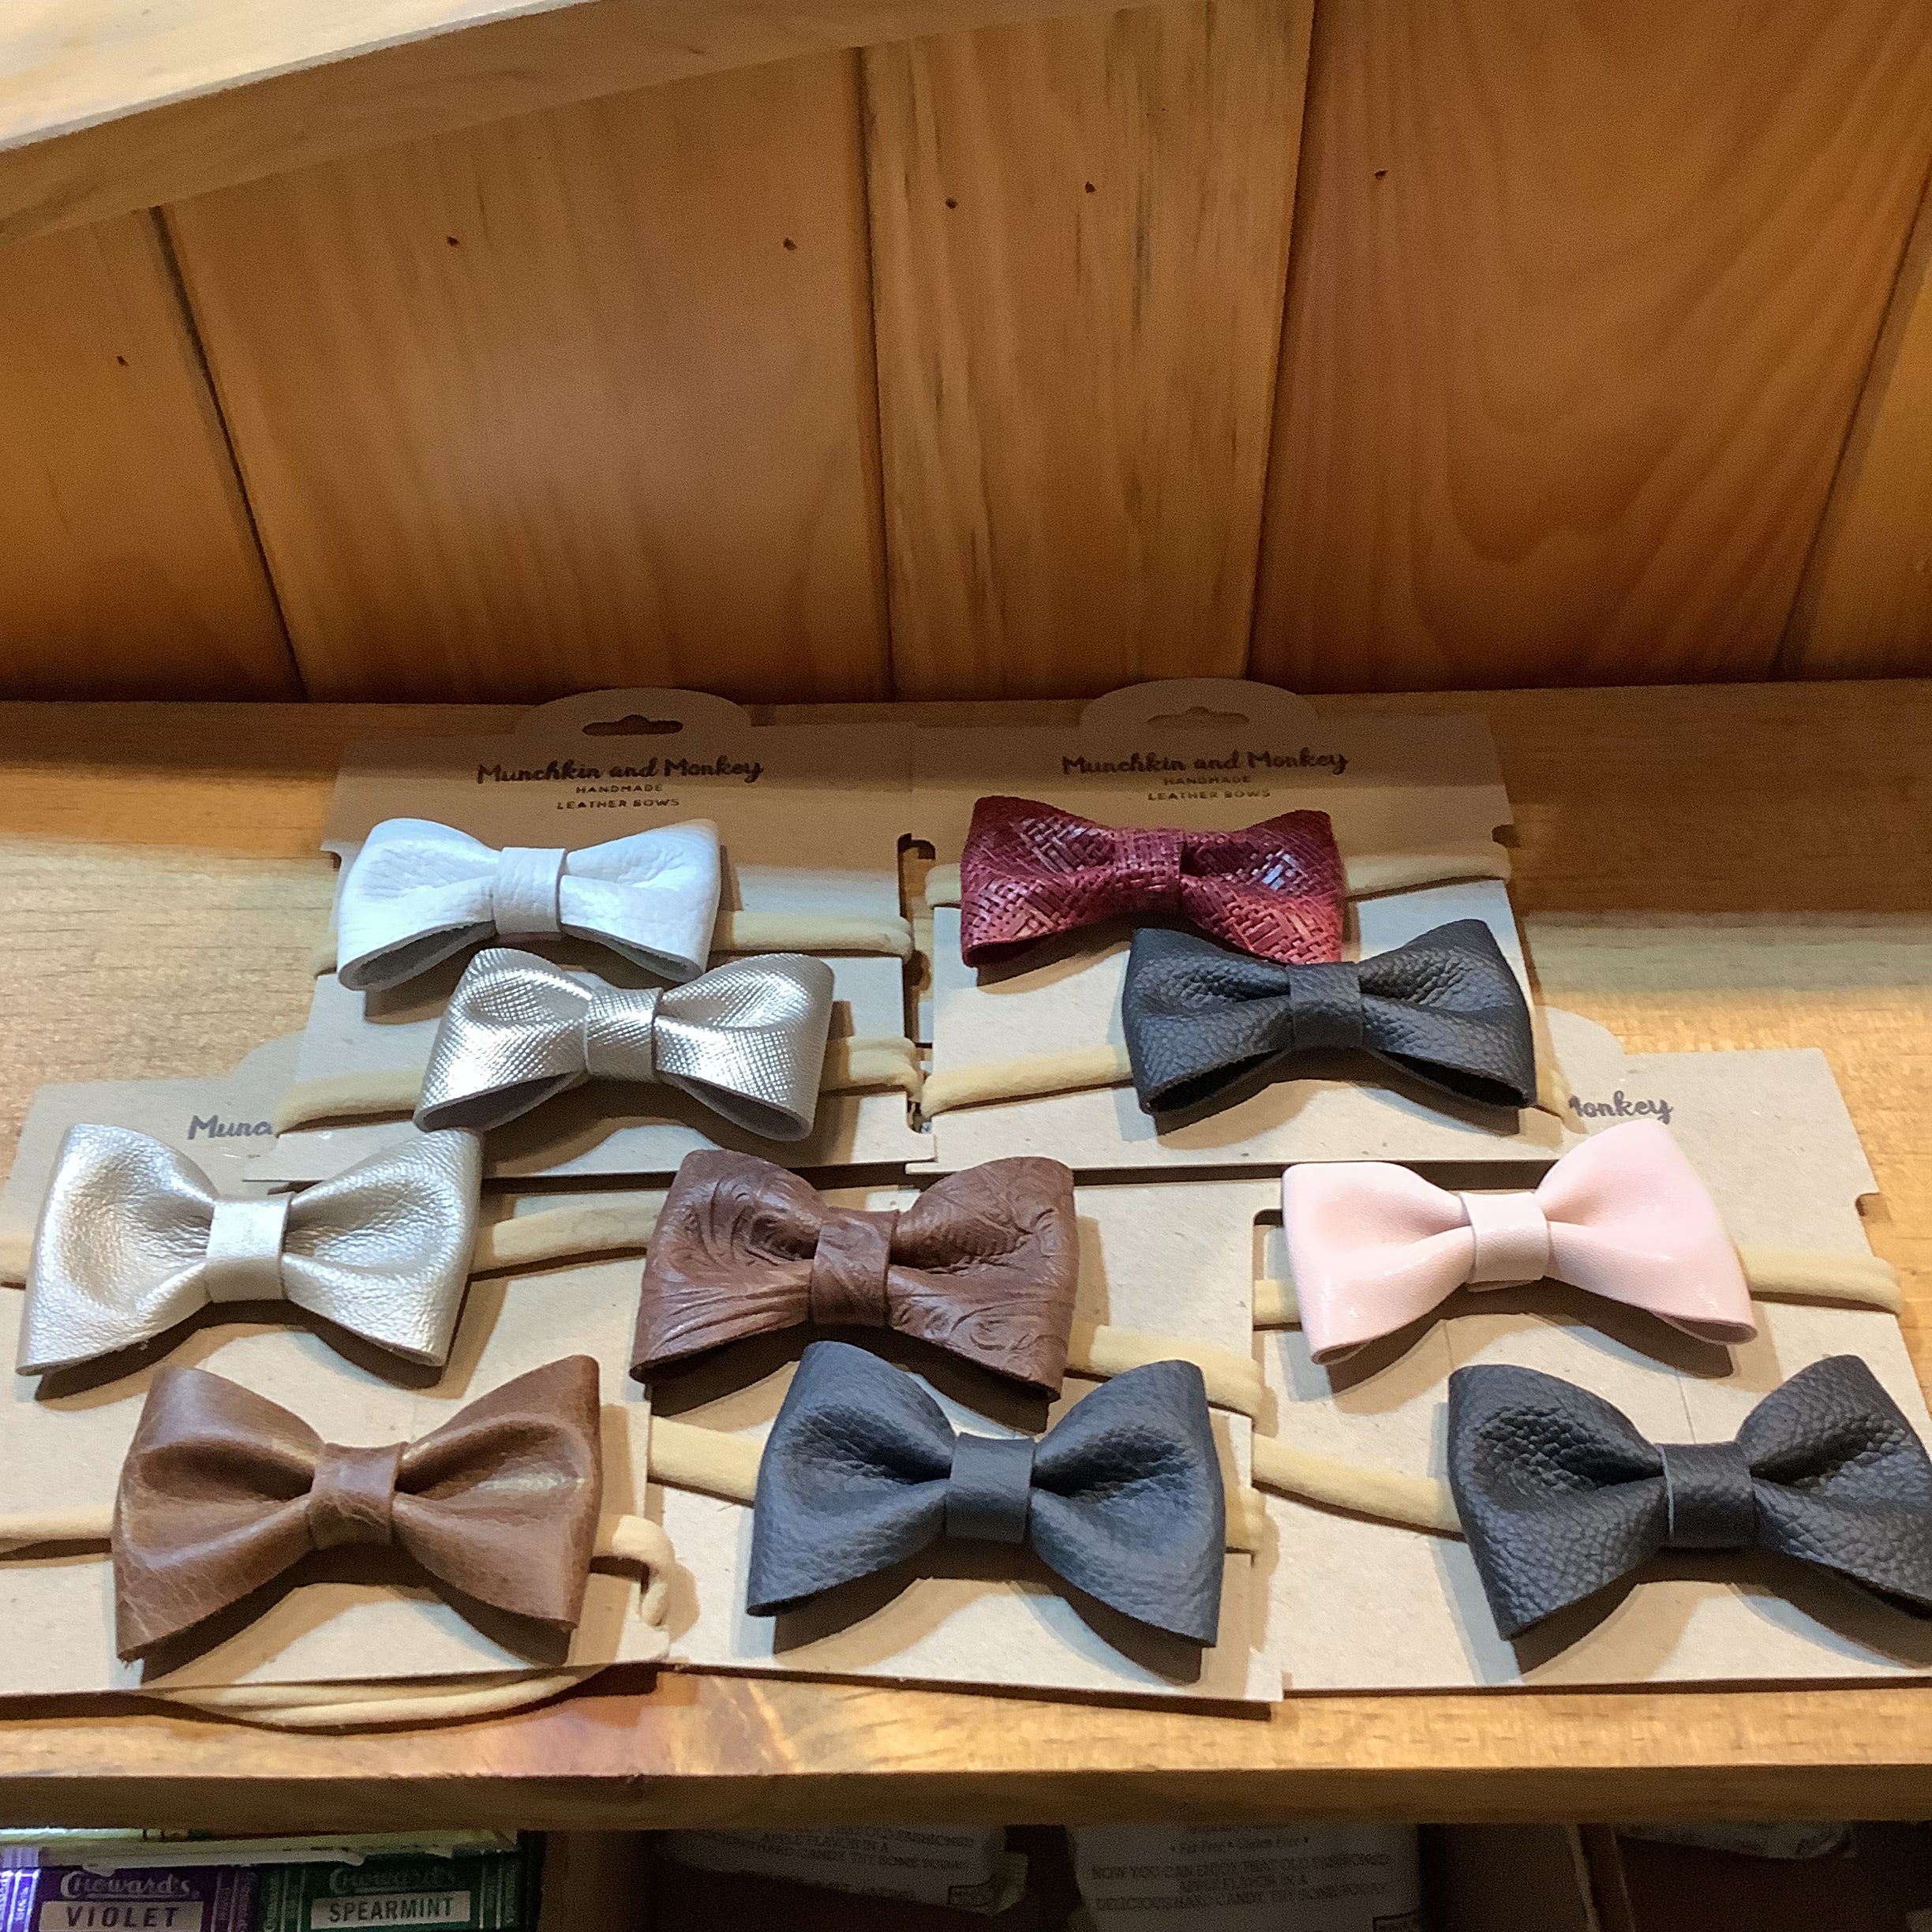 Munchkin and Monkey - Leather Bow Clips